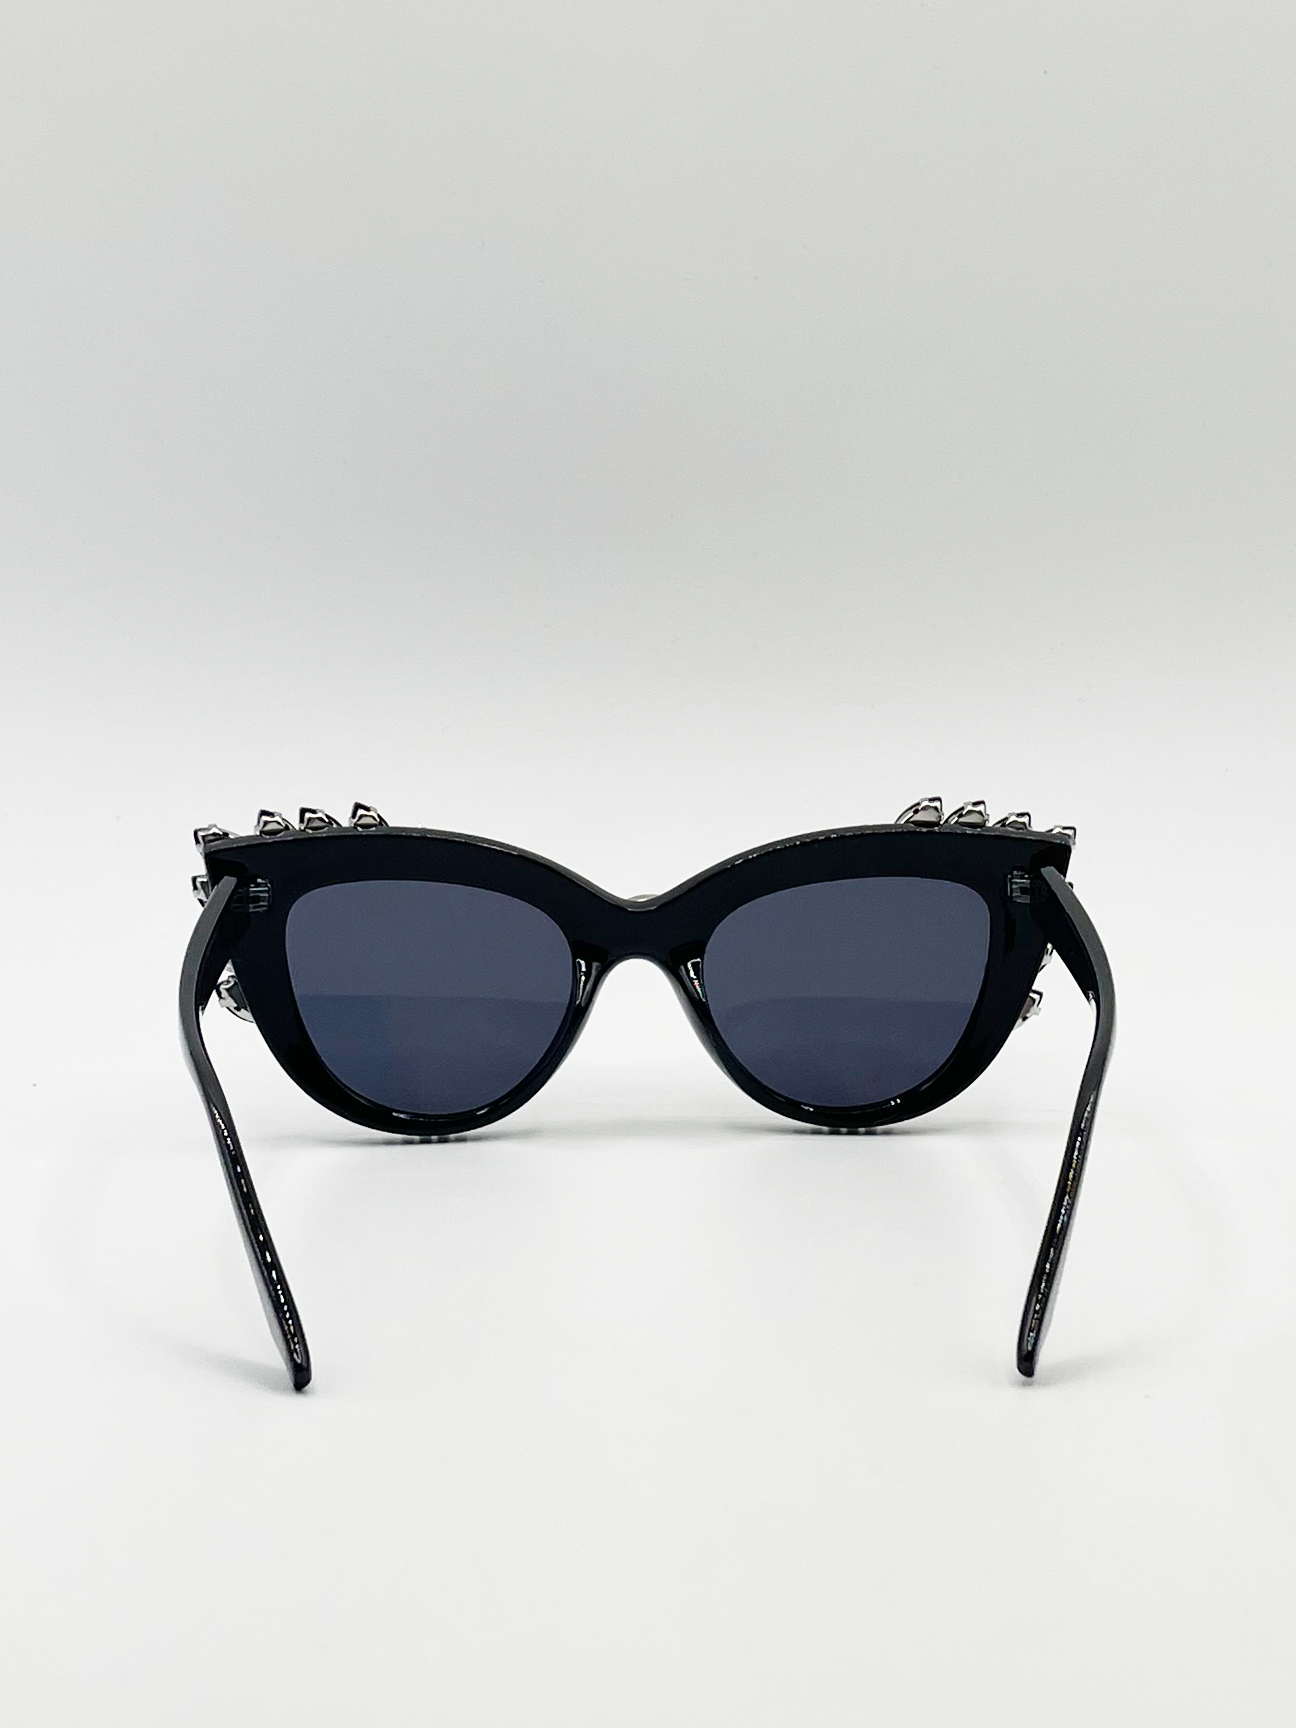 Cateye Sunglasses with Black and Silver crystals